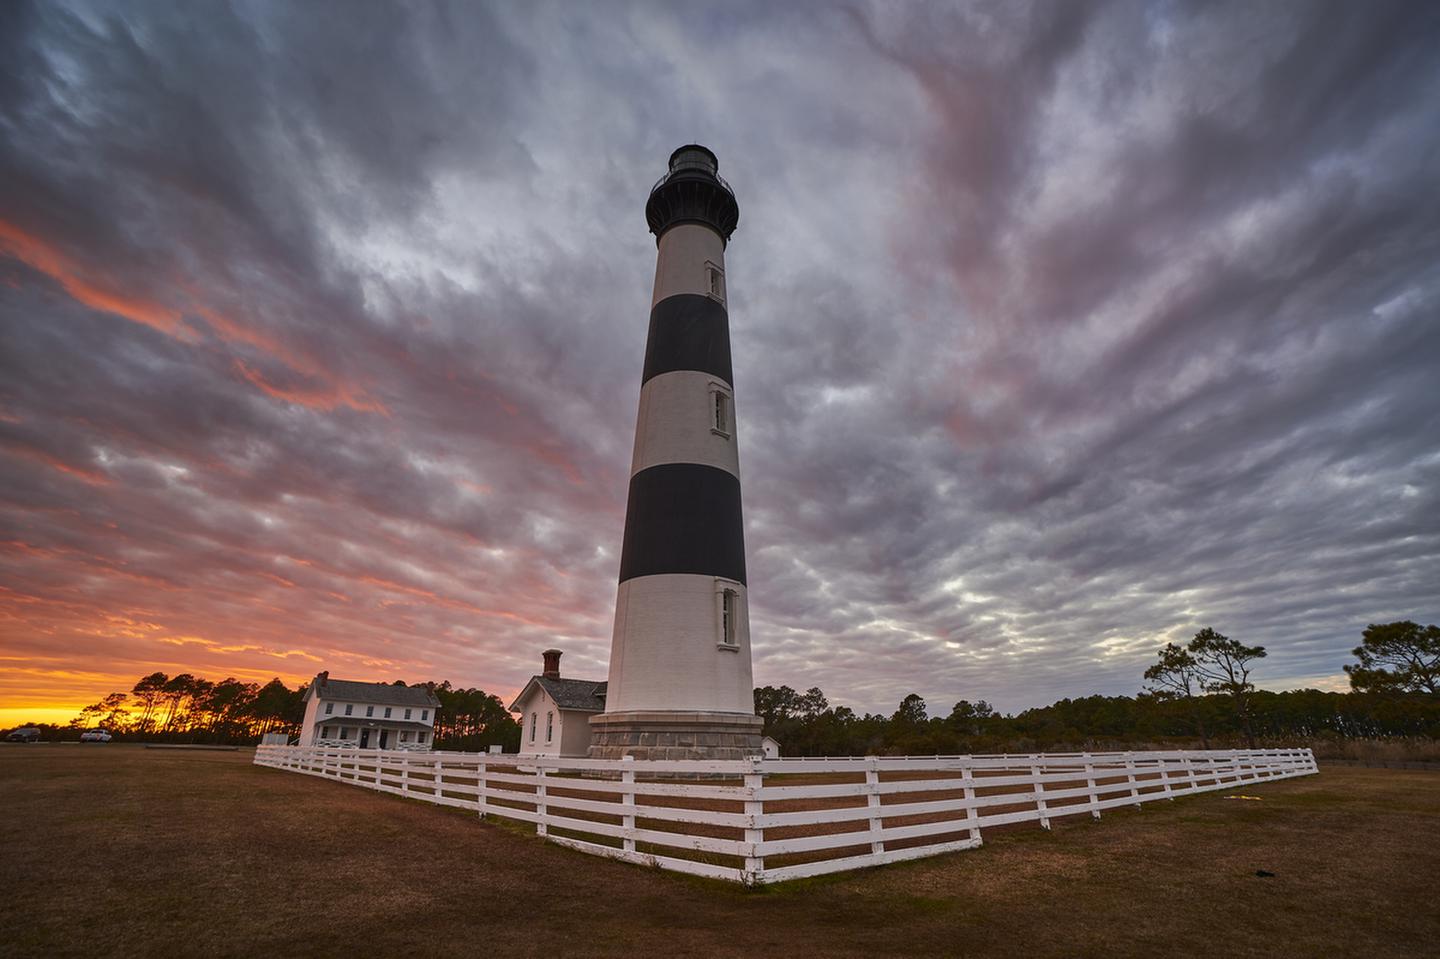 Sunset at Bodie Island lighthouseSunset at Bodie Island lighthouse.